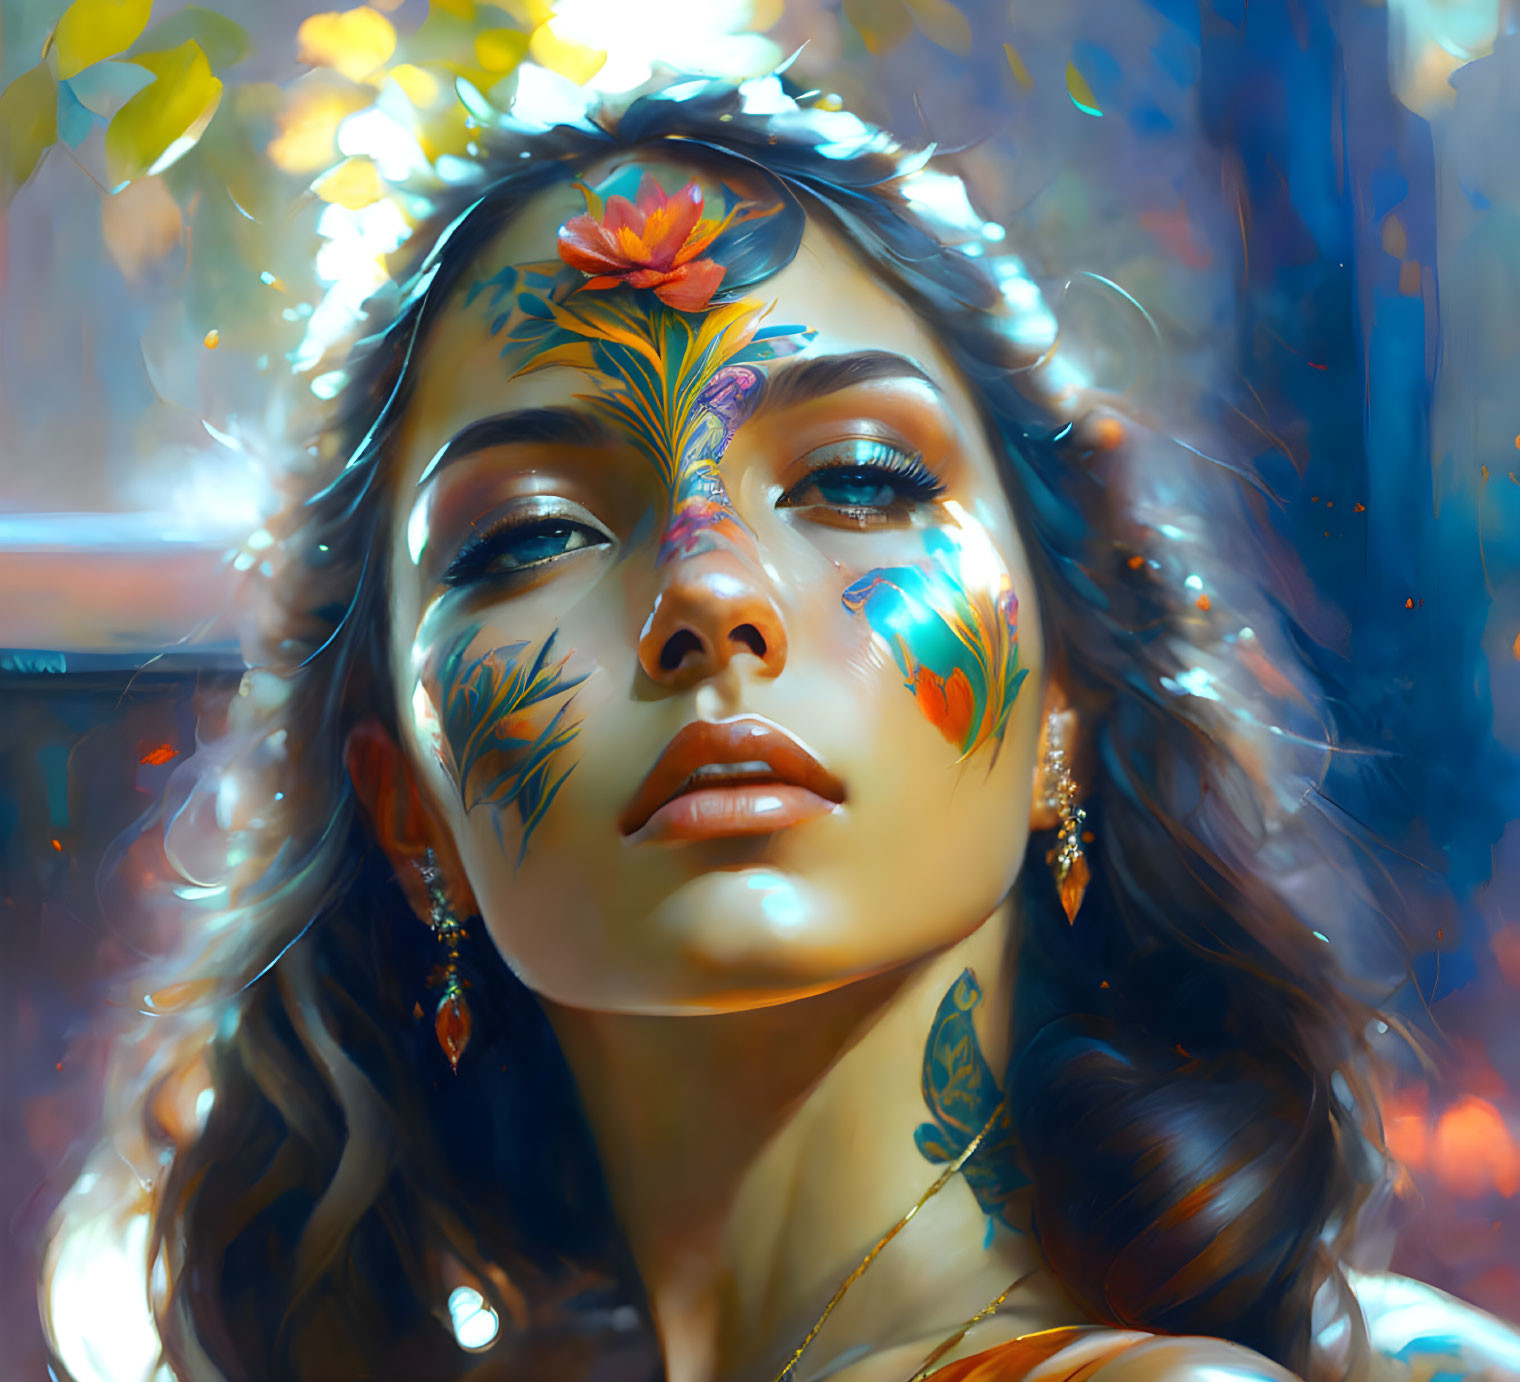 Elaborate floral face paint and tattoos on a woman in warm, dappled light